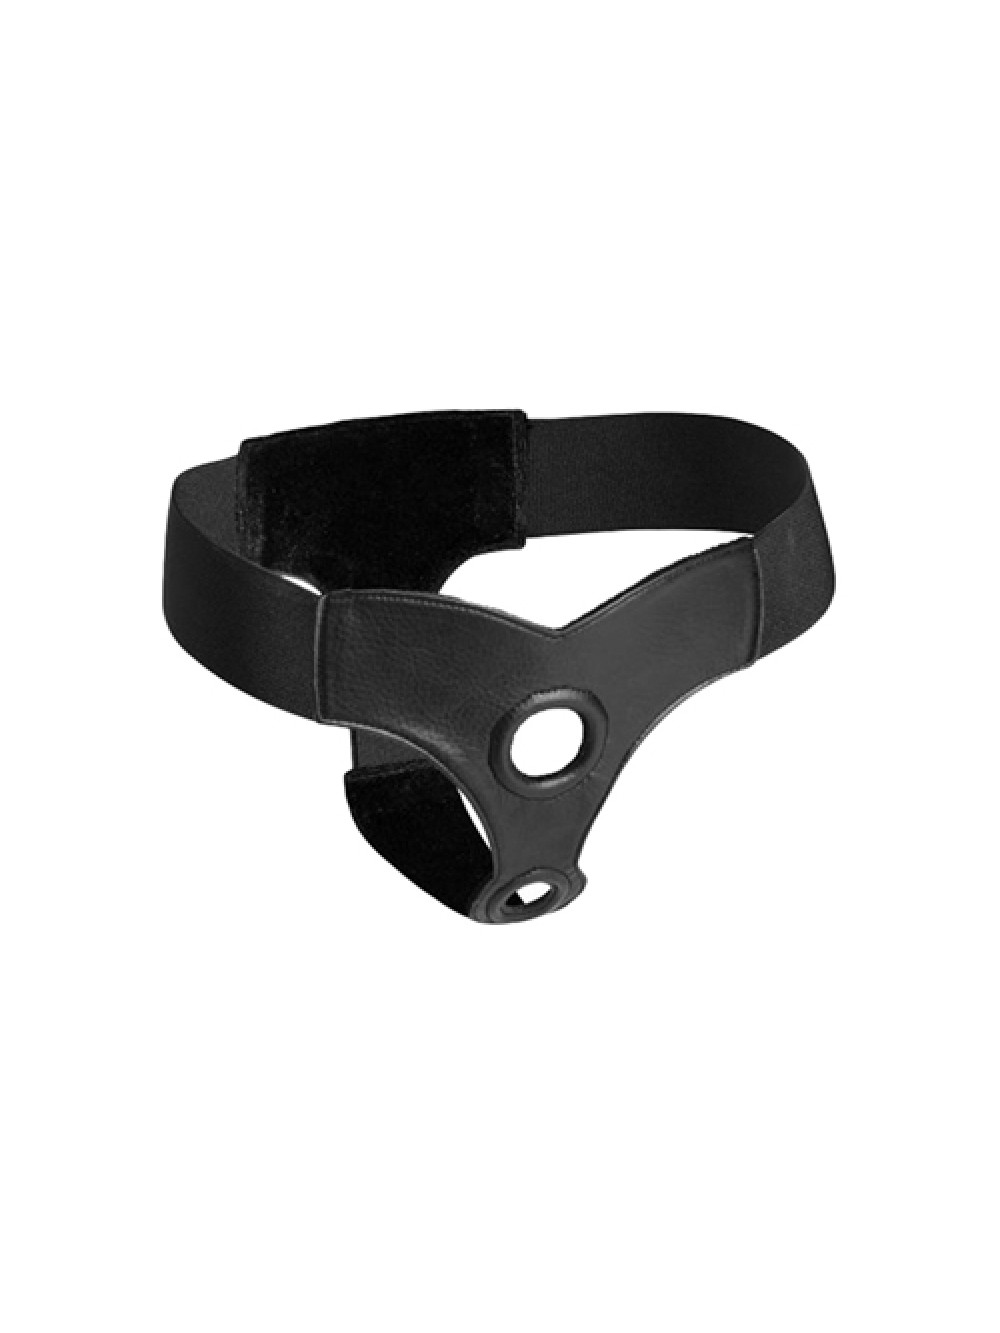 Crave Double Penetration Strap On Harness